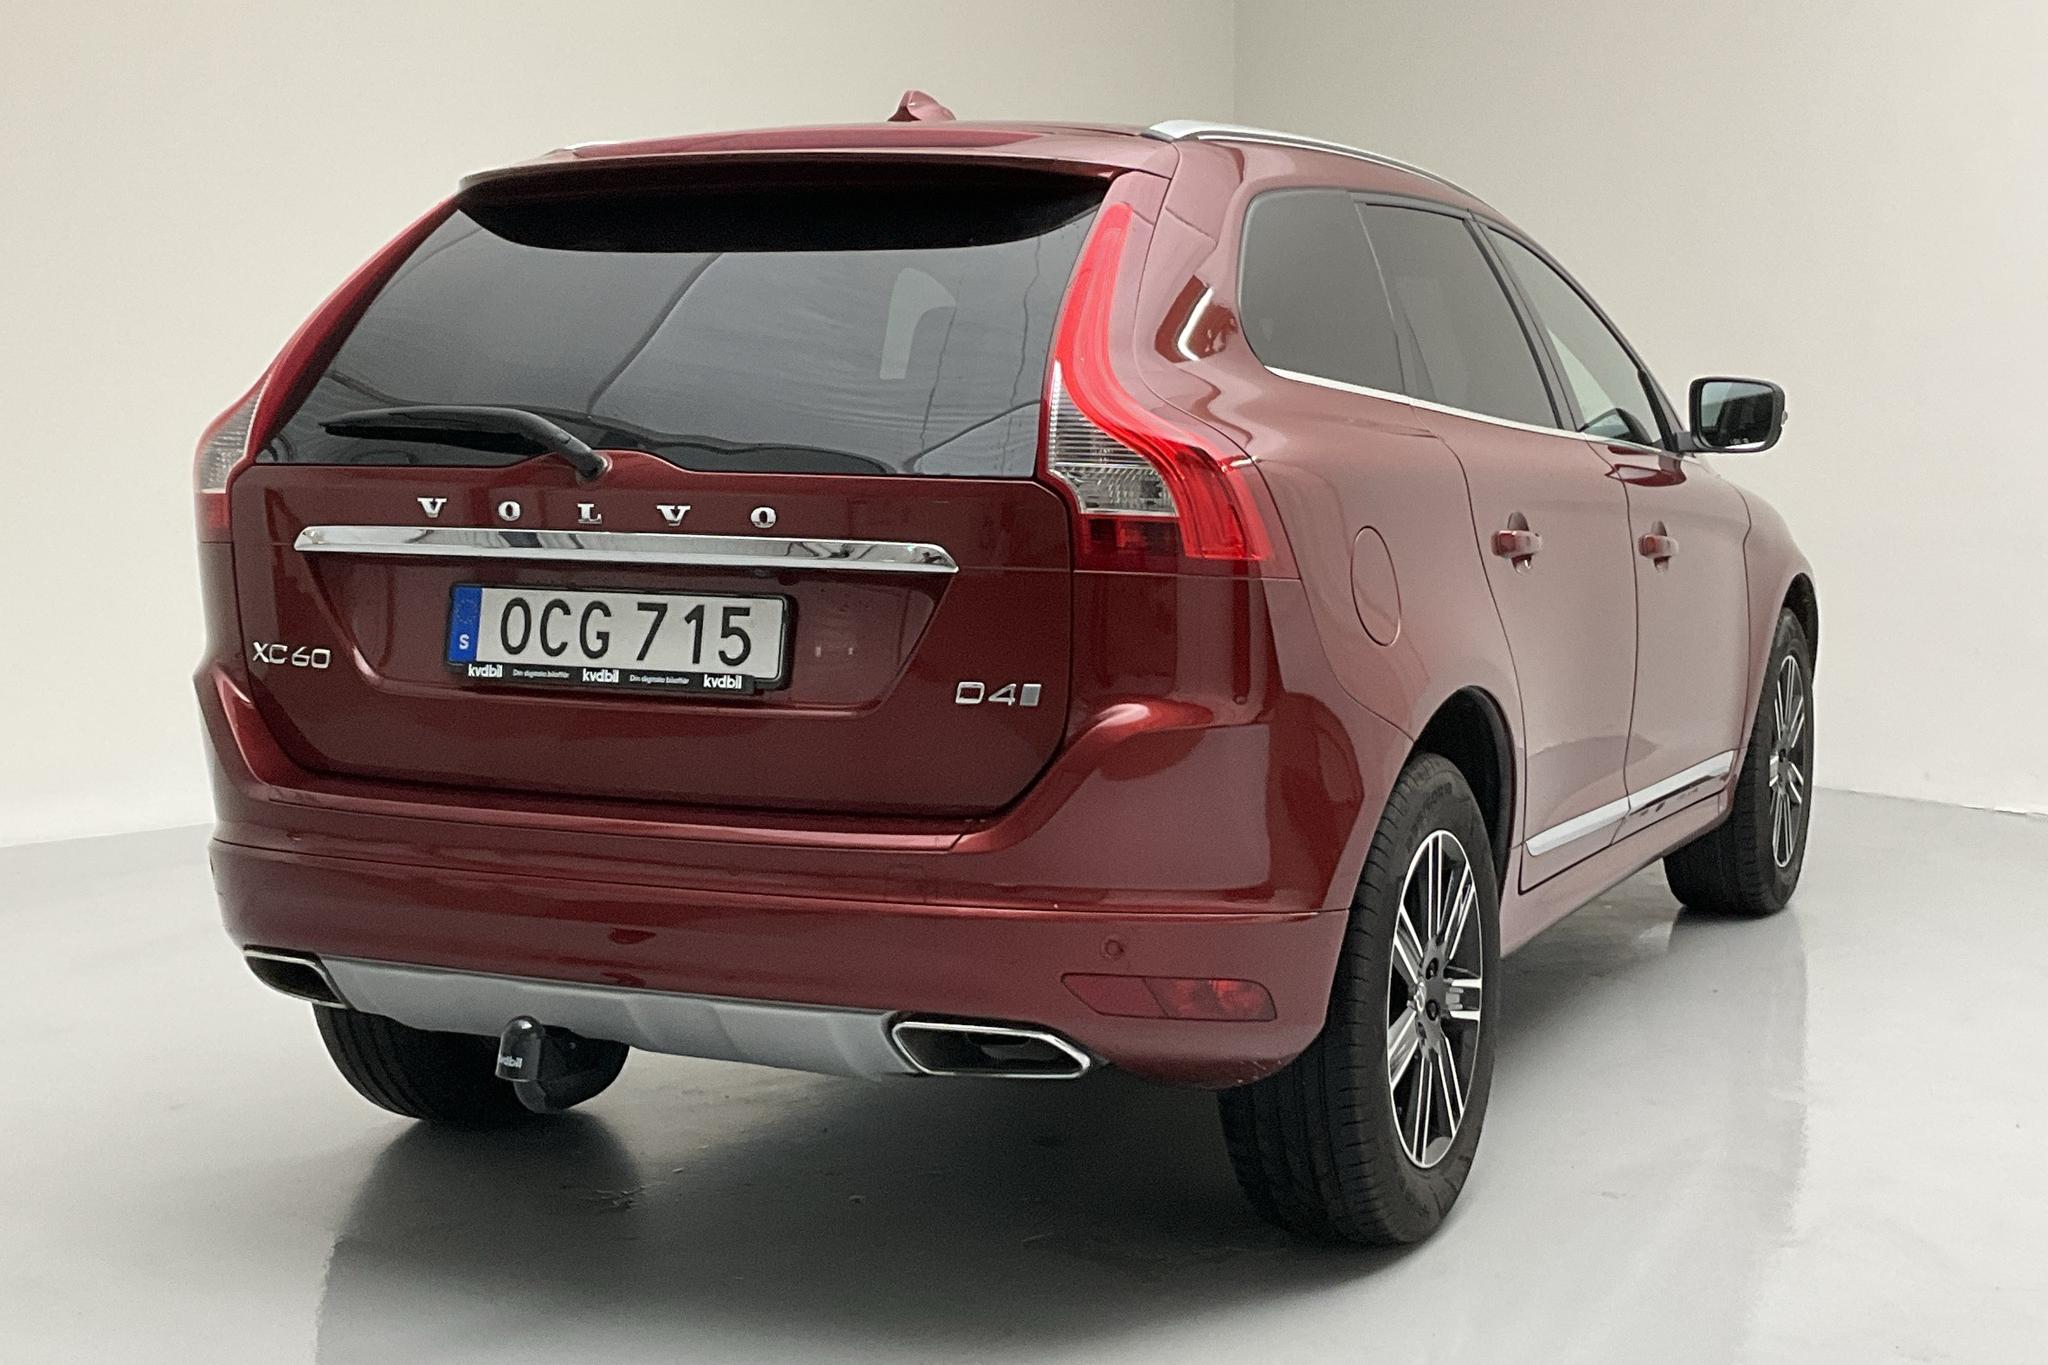 Volvo XC60 D4 2WD (190hk) - 169 790 km - Automatic - red - 2017